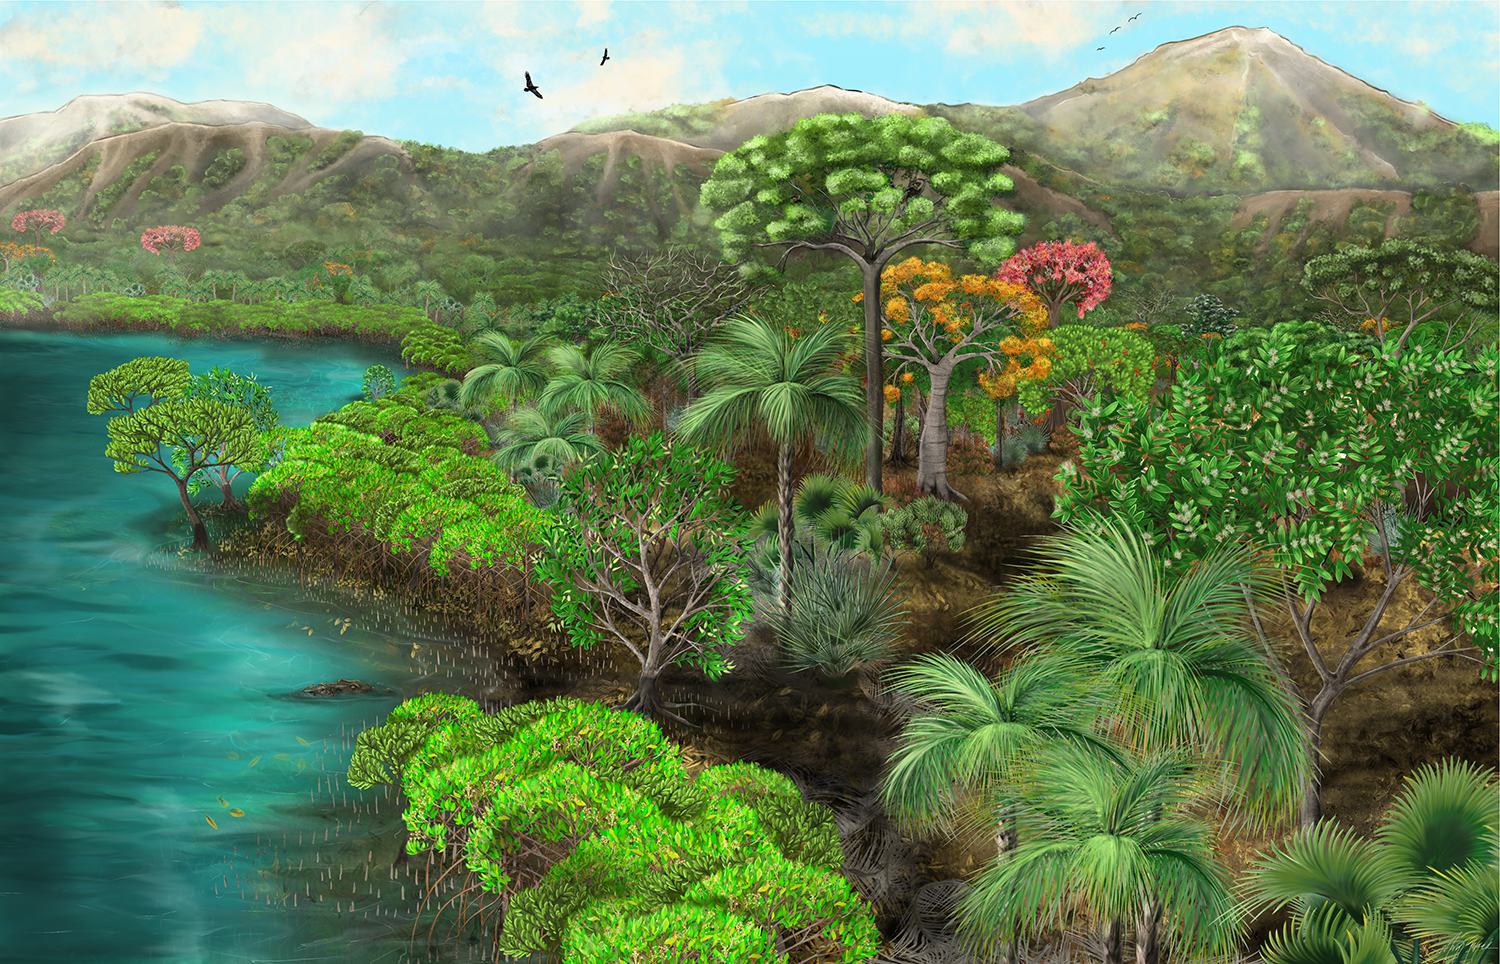 Artist reconstruction of a dry tropical forest with green trees of different heights growing along the edge of the water of the inlet of an ocean. In the distance is a volcanic peak with blue skies behind.